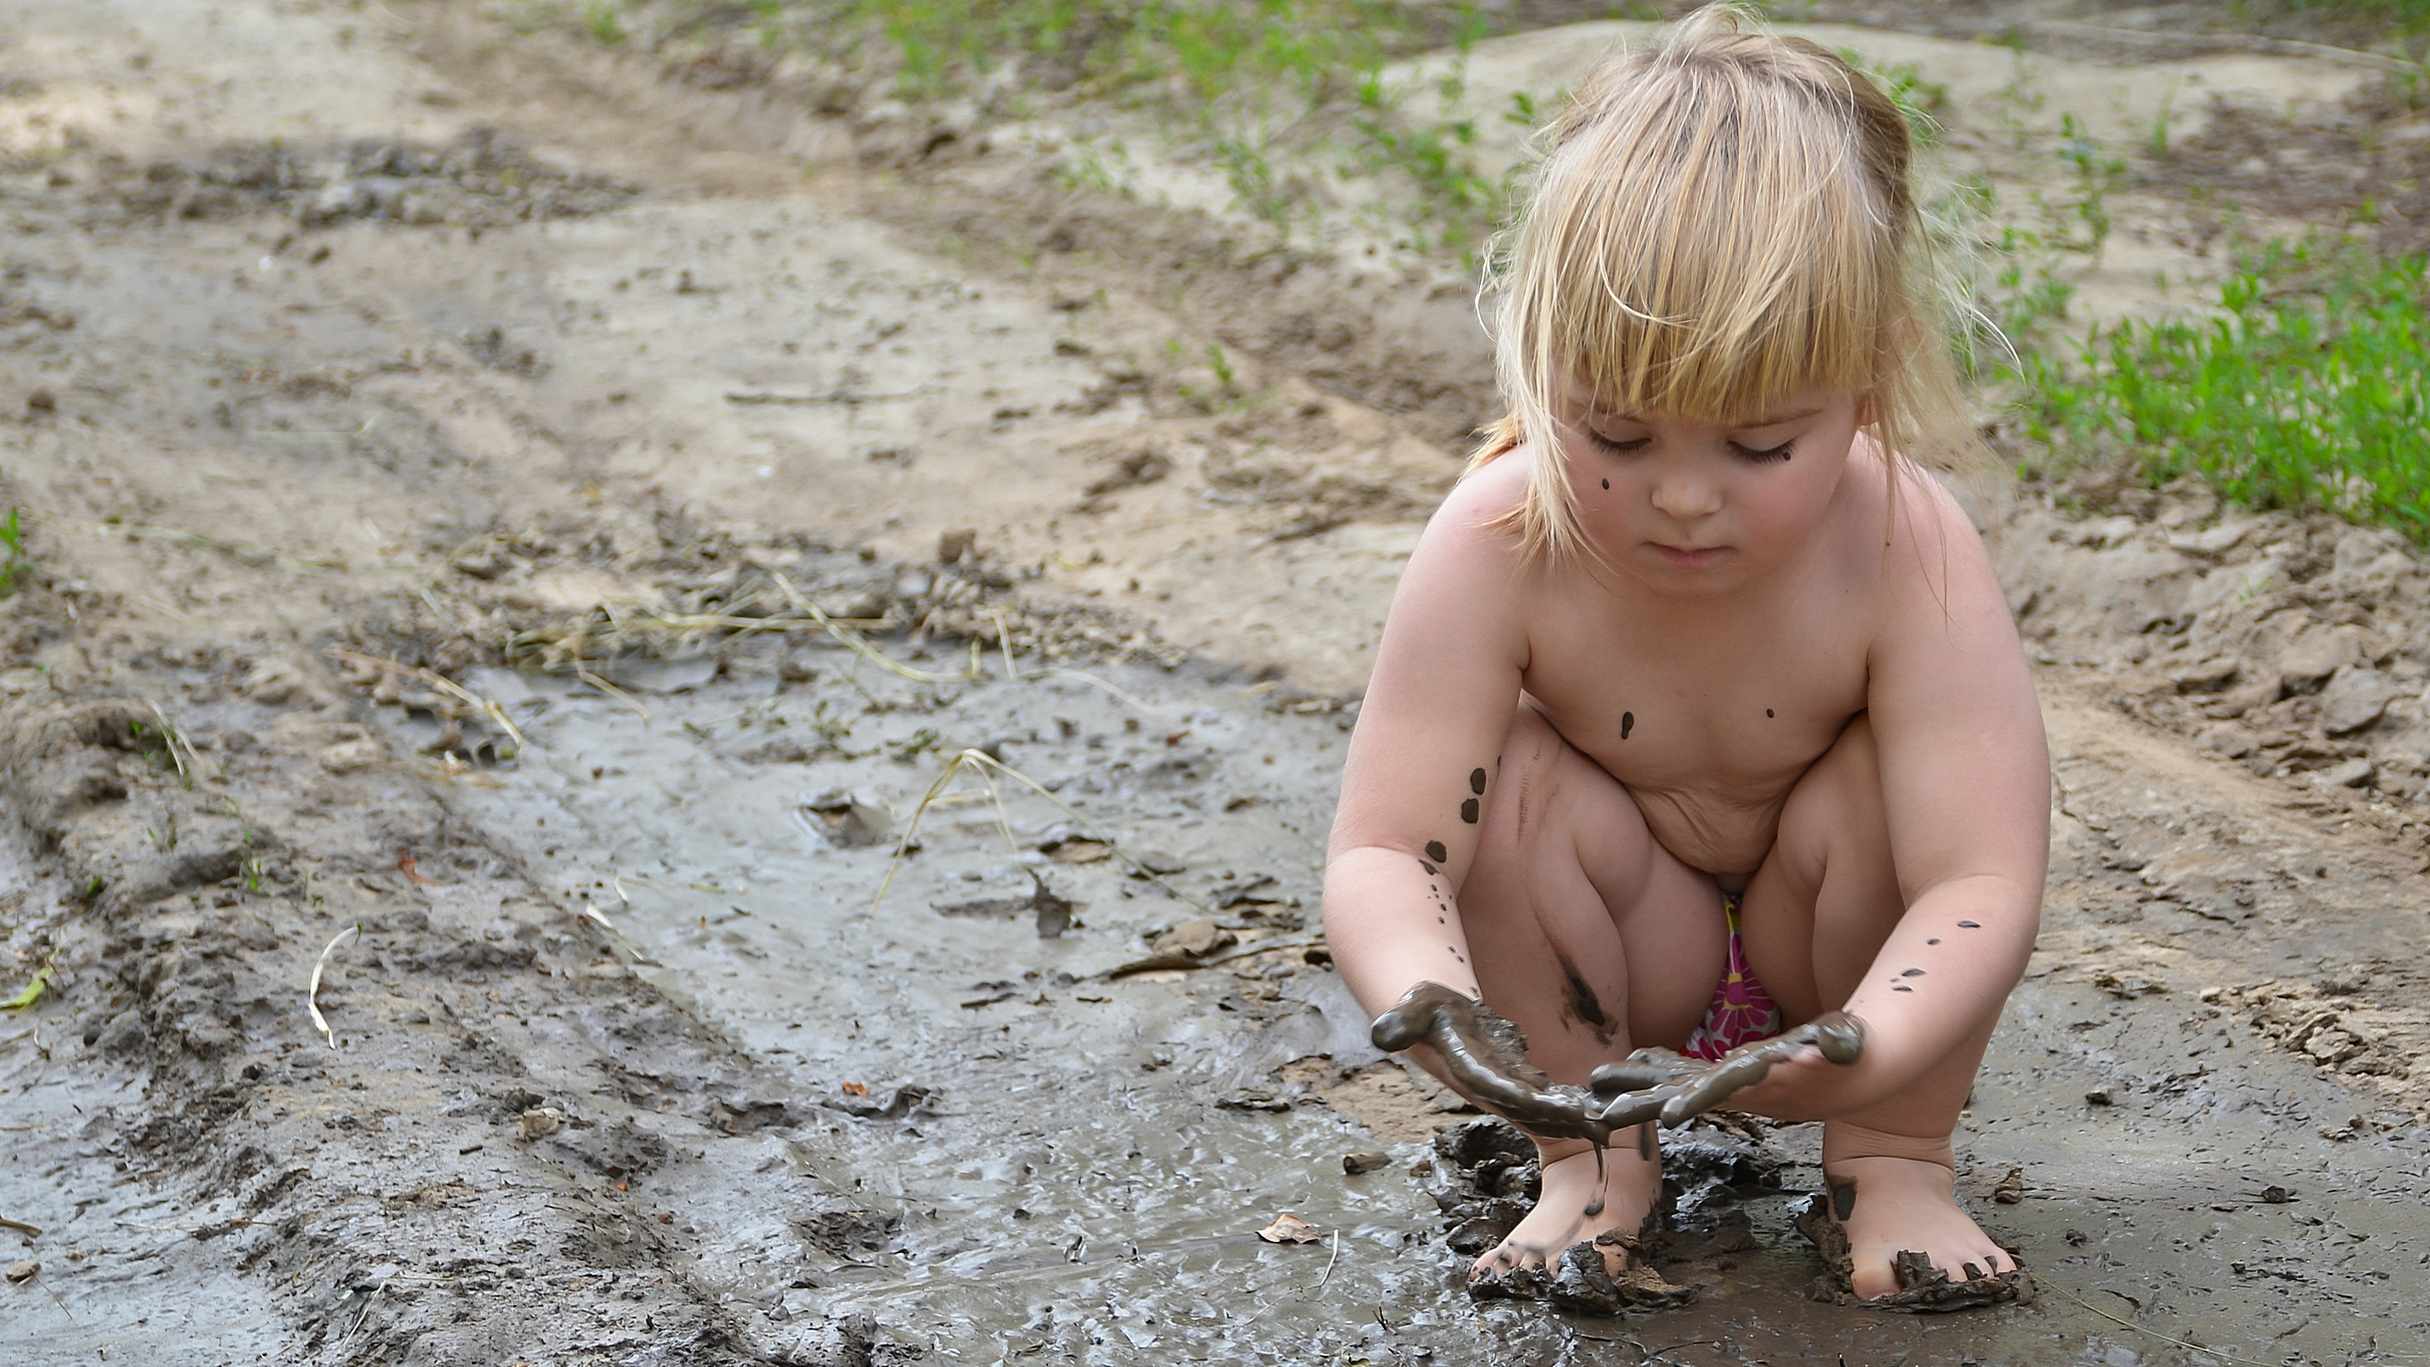 a little girl playing on a dirt road in the mud